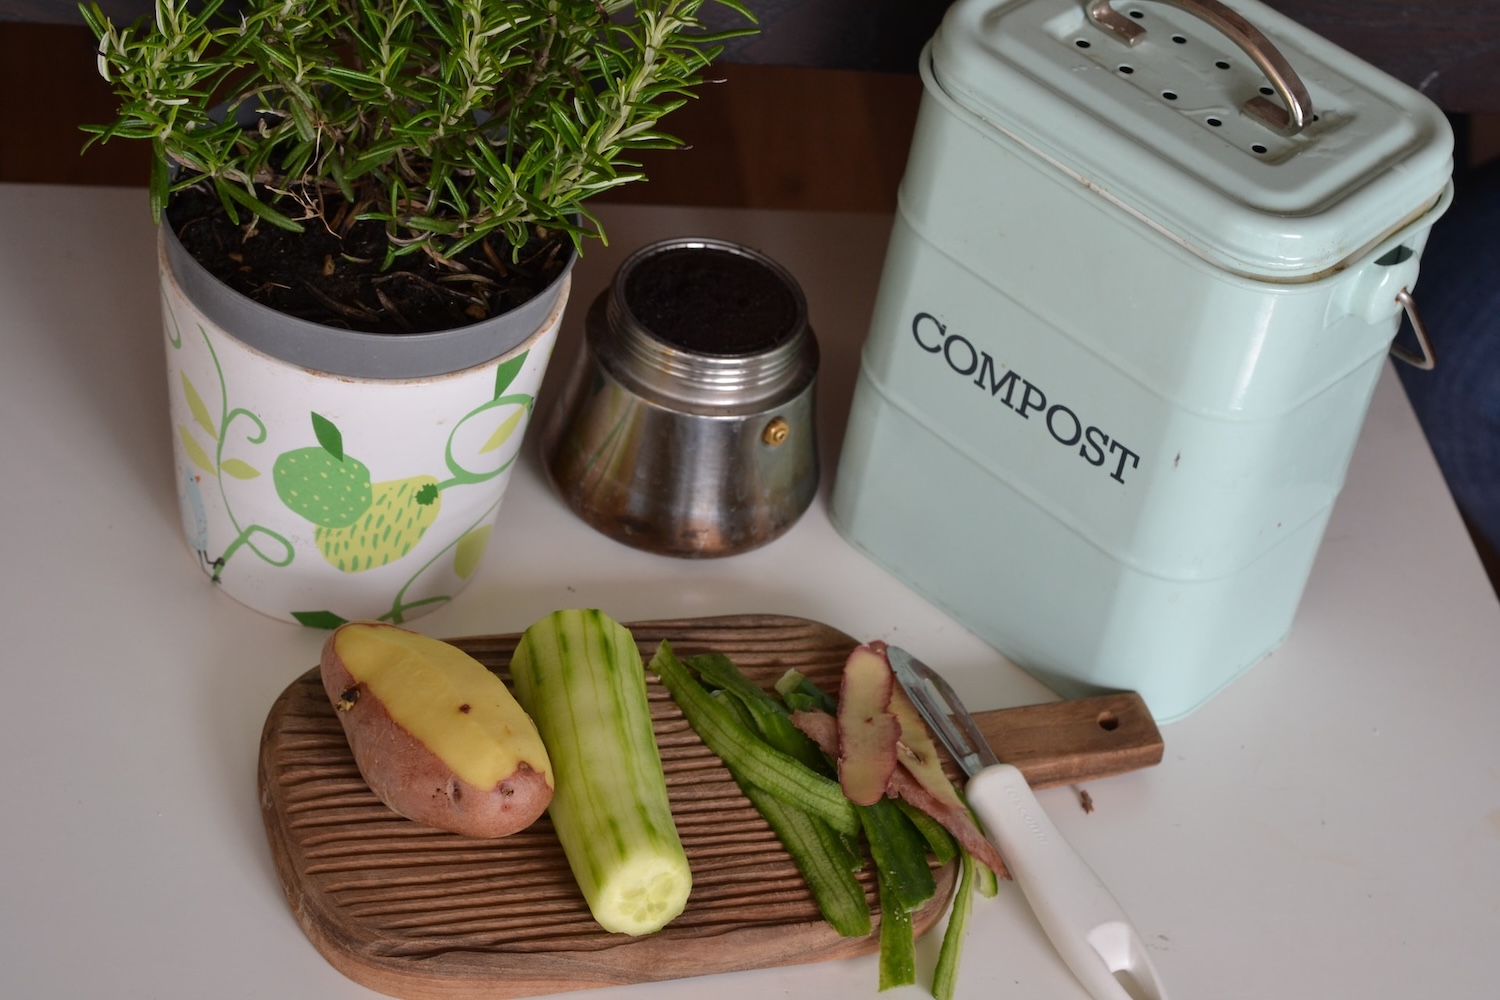 compost at home to reduce waste - sustainable habits